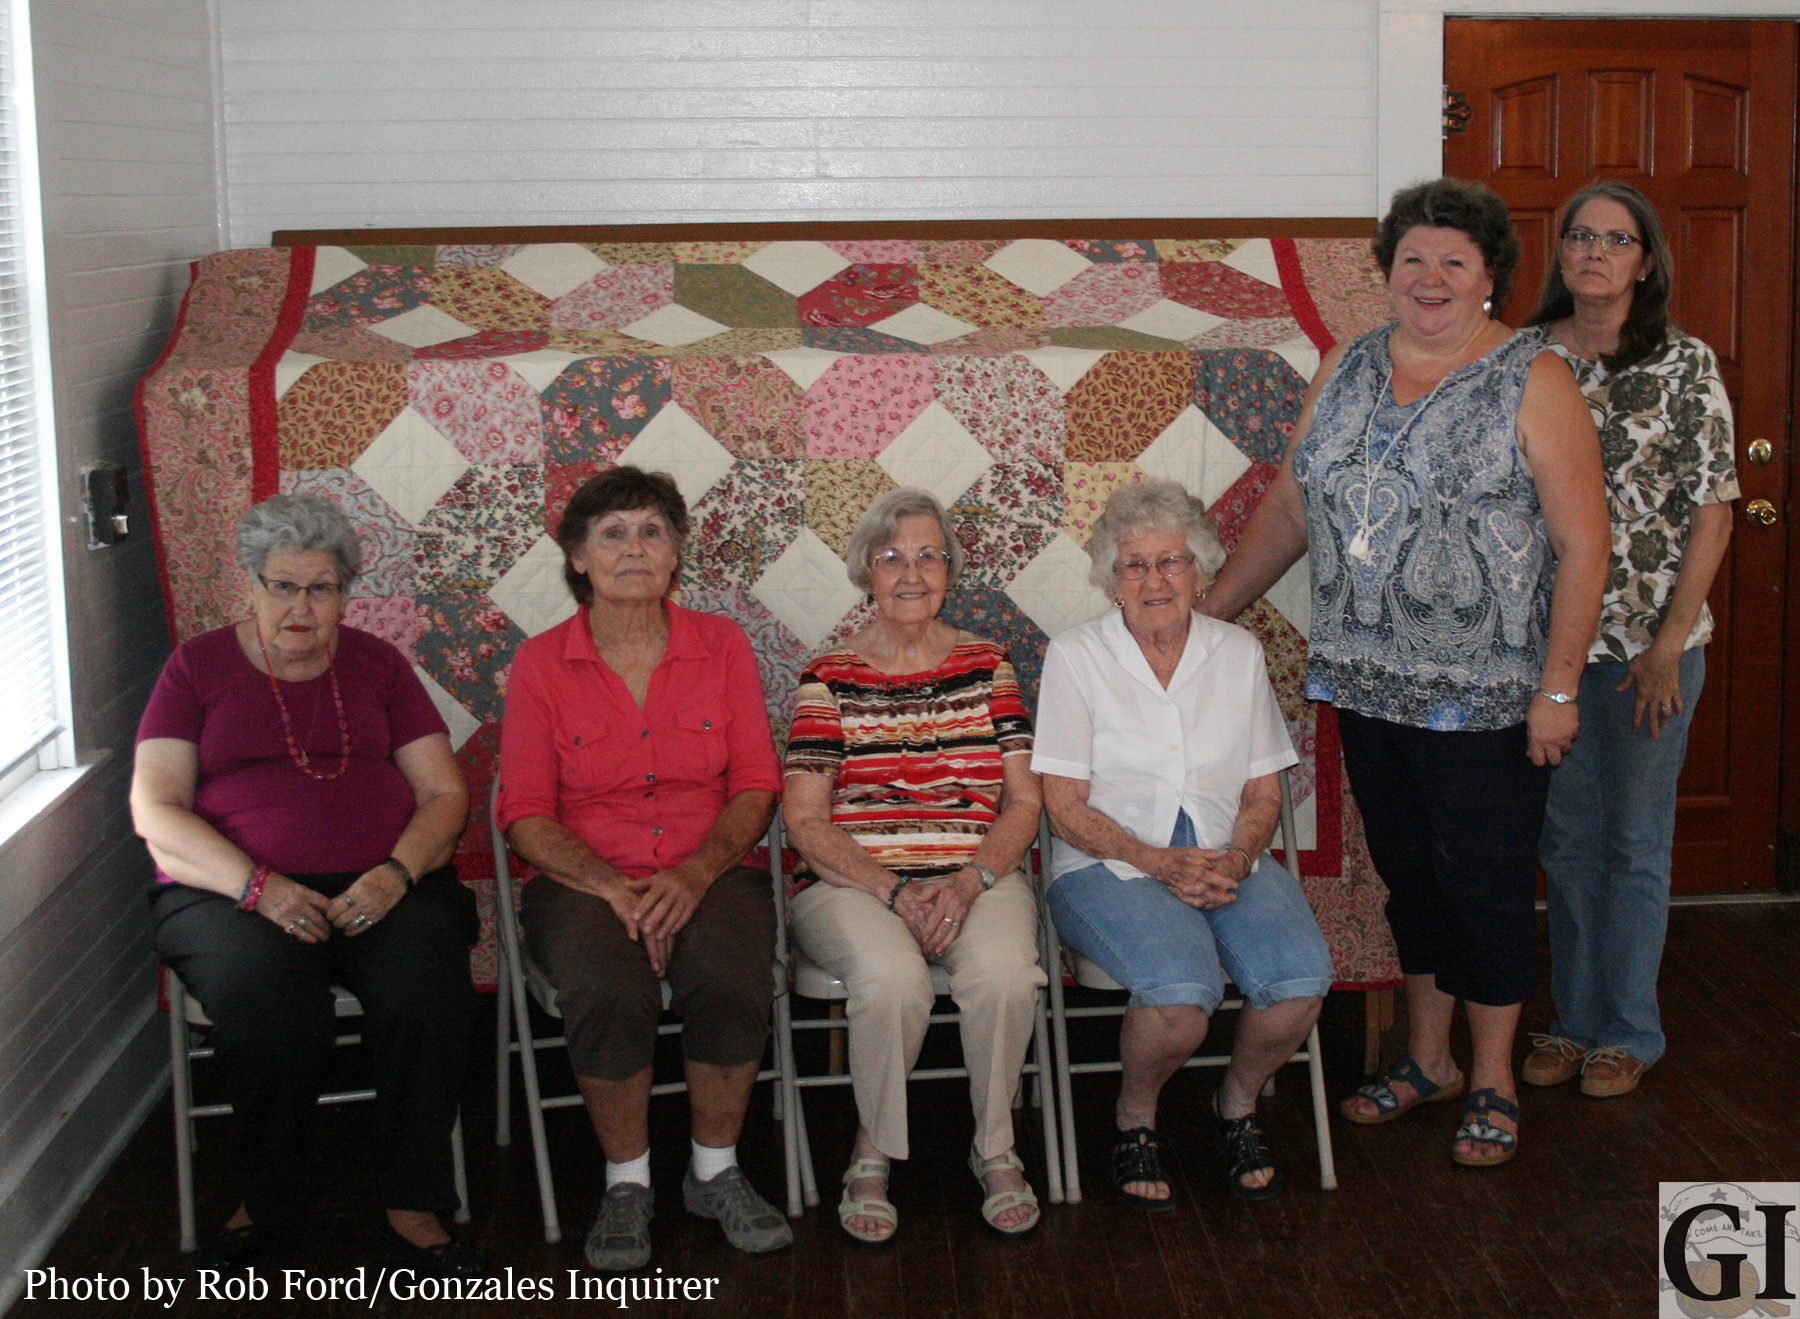 Leesville’s Happy Quilters proudly display this year’s “Hugs and Kisses” quilt. Pictured from left are Ruth Newberry, Margie Rice, Charlene Anderson, Janis Littlefield, Penny Cardwell and Terri Porter.